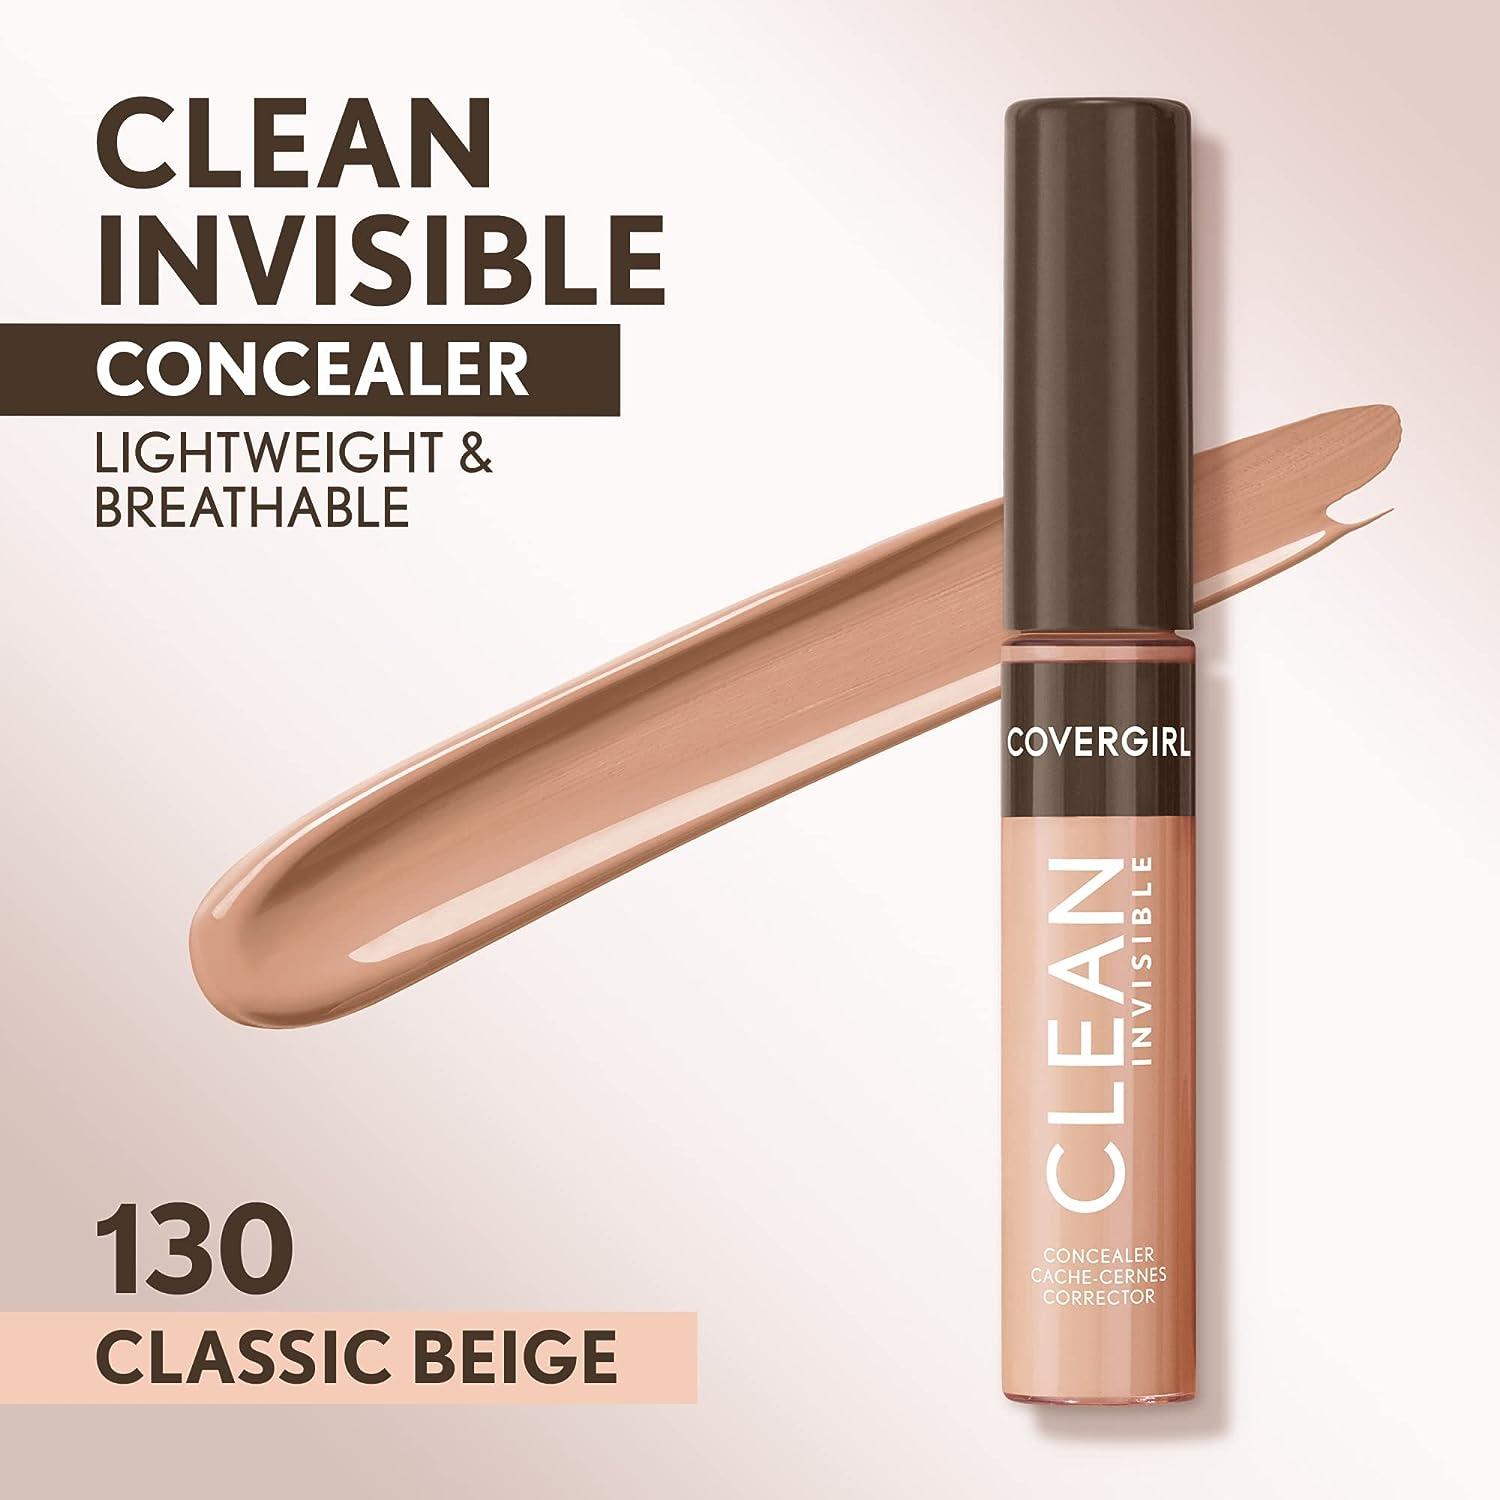 The Invisible Graphic Liner Is The Perfect Clean Girl Look - HELLO! India